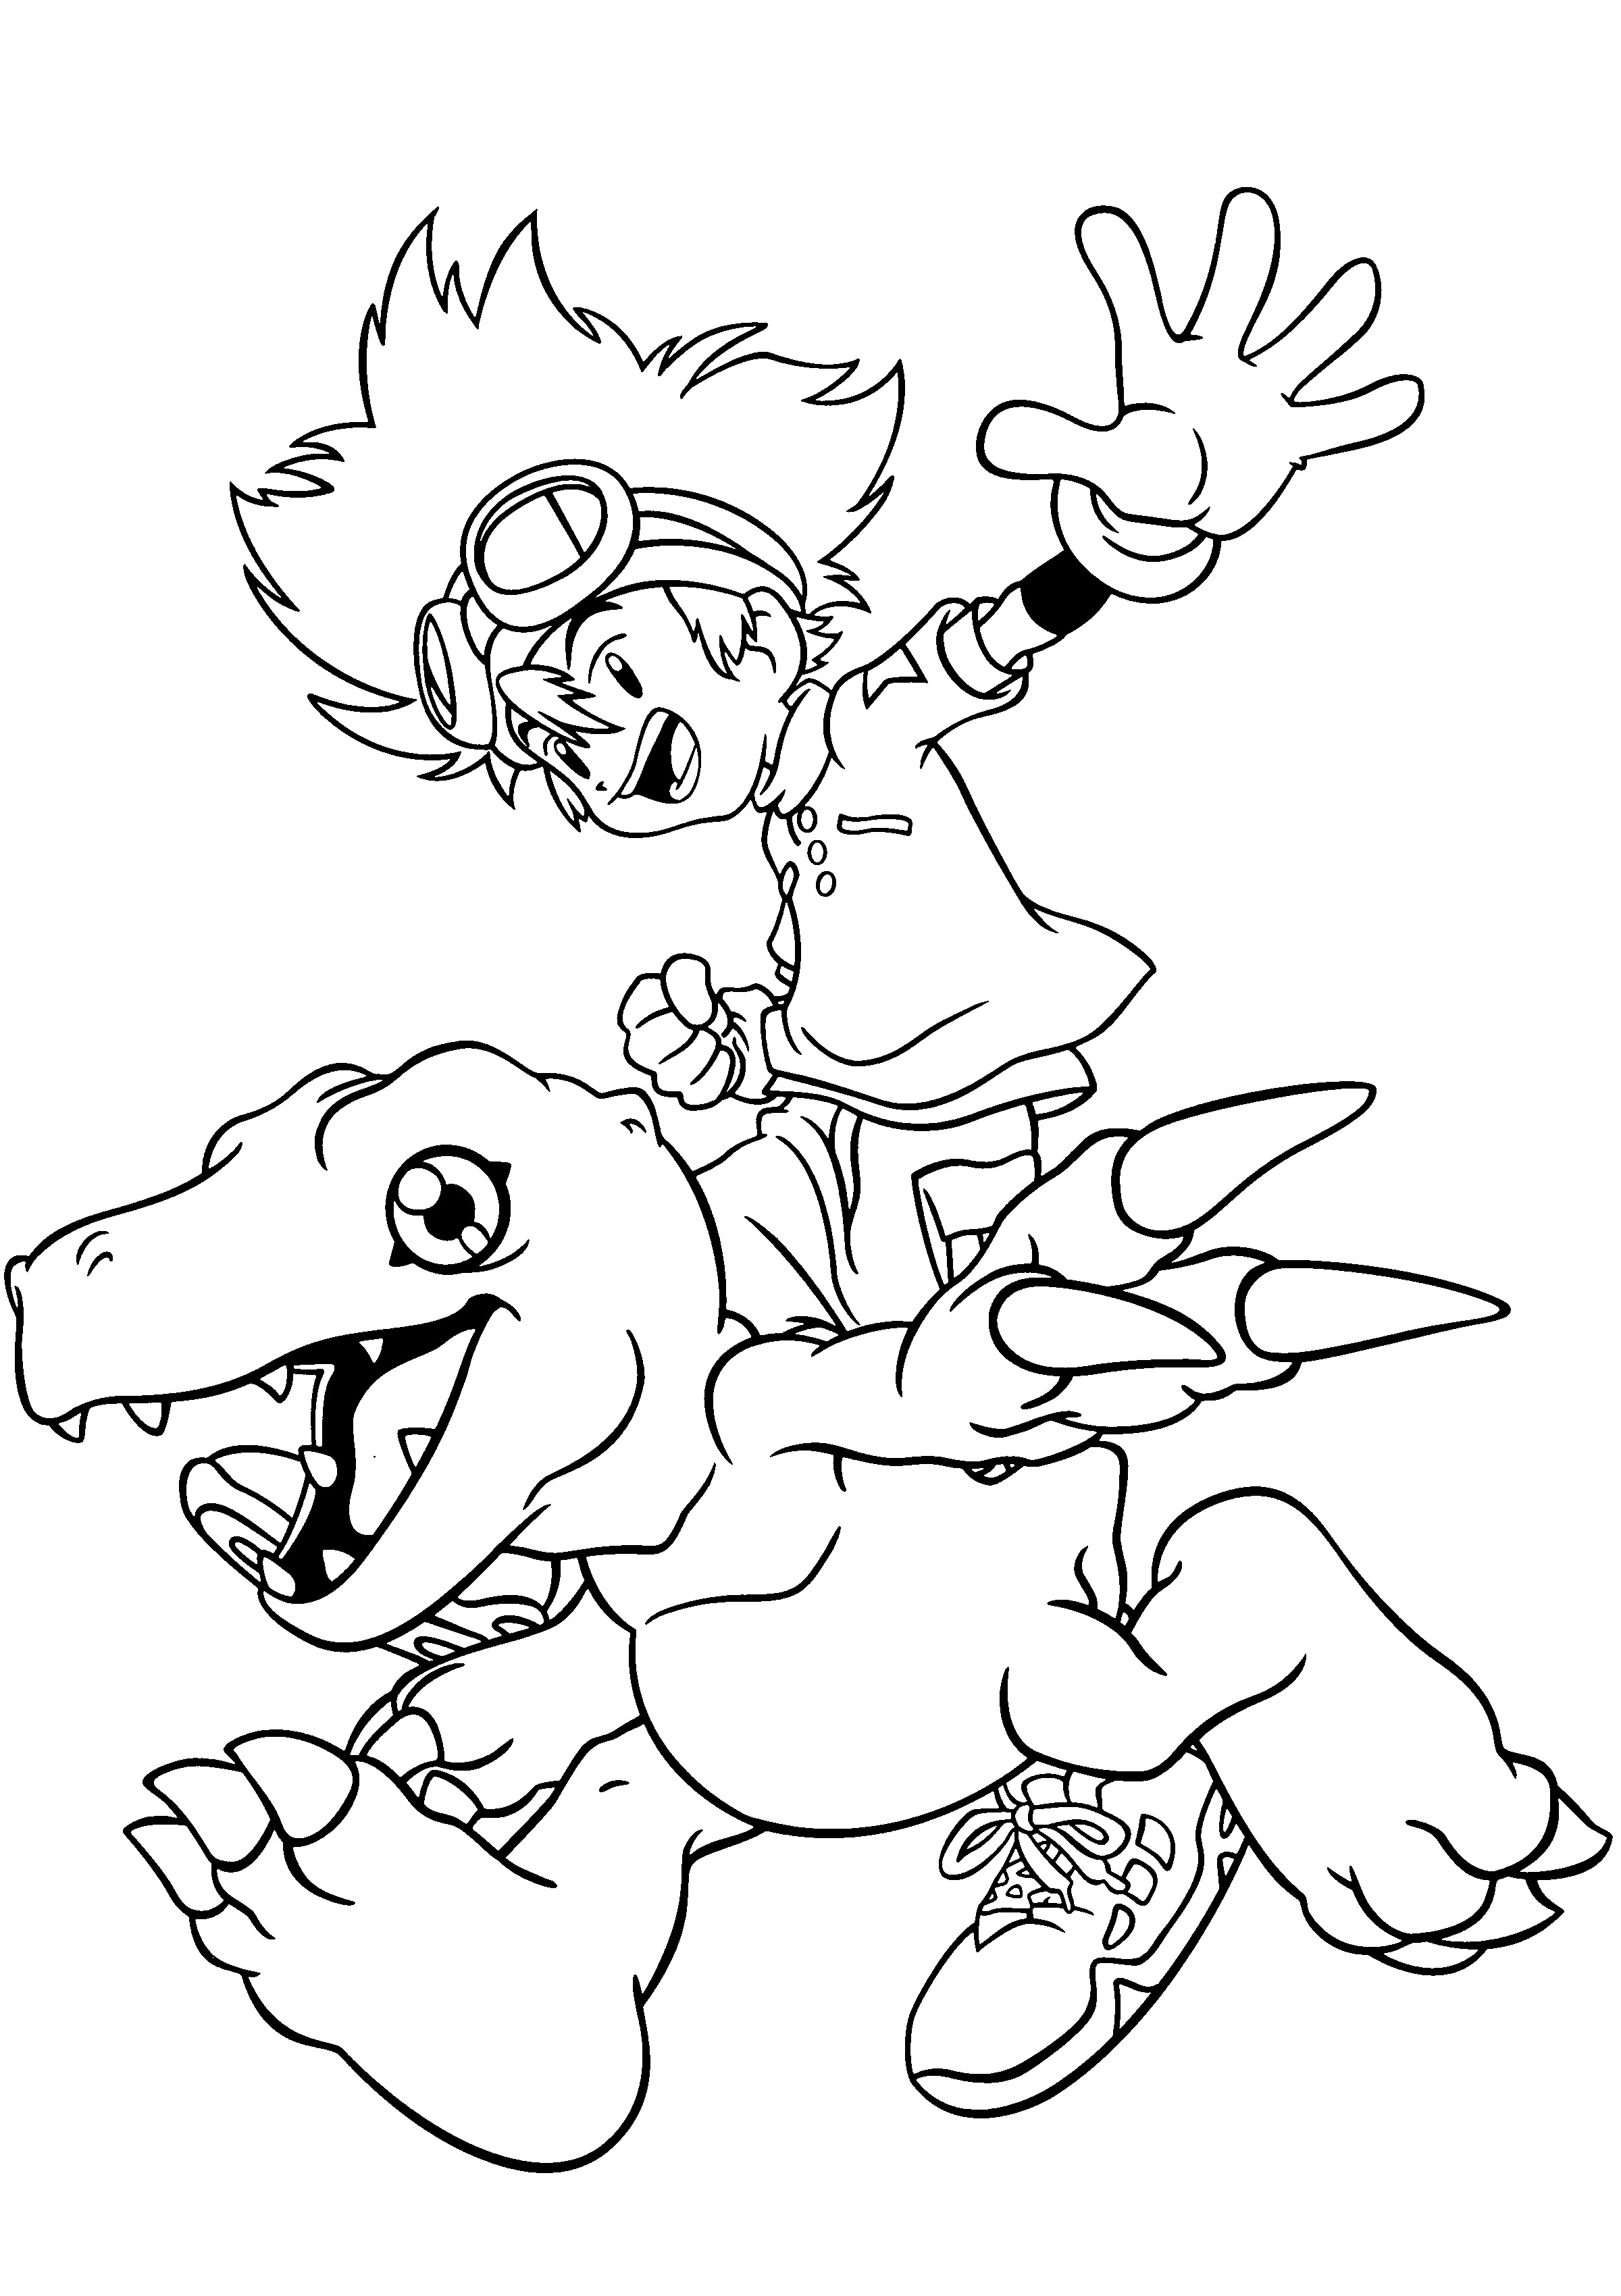 Printing A Coloring Book
 Free Printable Digimon Coloring Pages For Kids